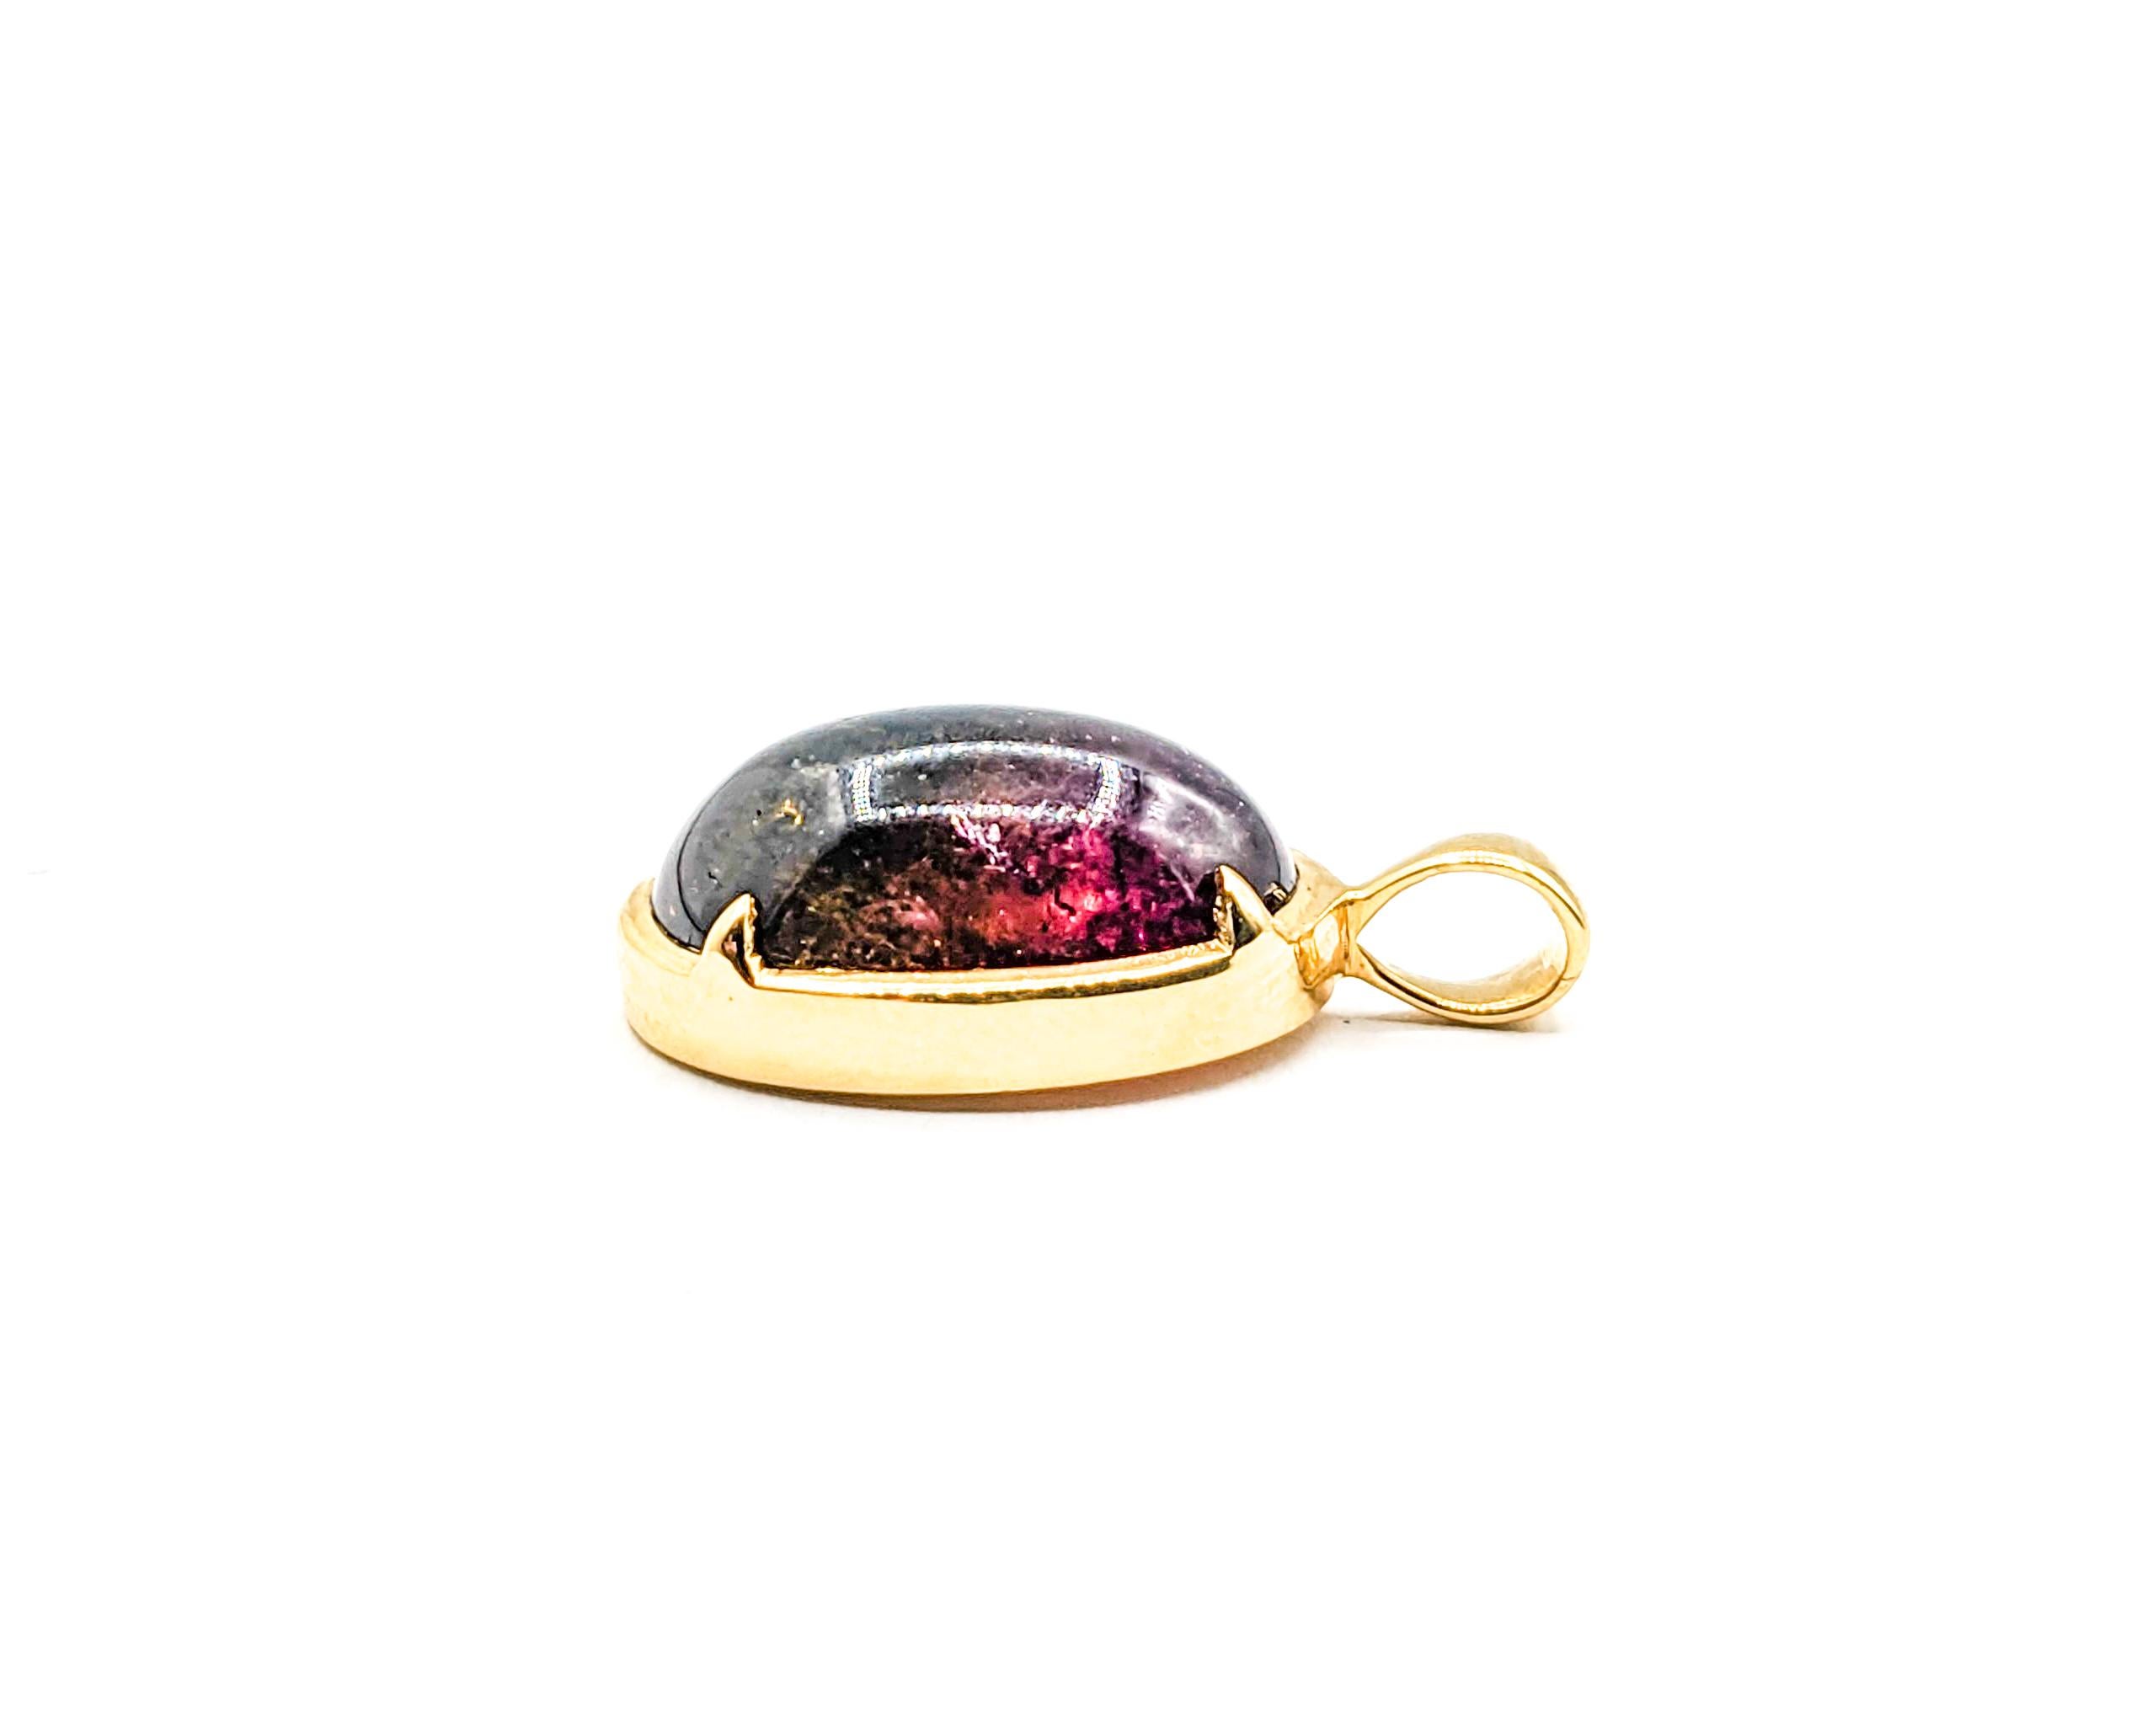 Classic 18k Oval Cabochon Watermelon Tourmaline Charm Pendant

Indulge in the exquisite beauty of our 18k yellow gold pendant adorned with a breathtaking 10ct cabochon watermelon tourmaline. The craftsmanship of this pendant is truly remarkable,